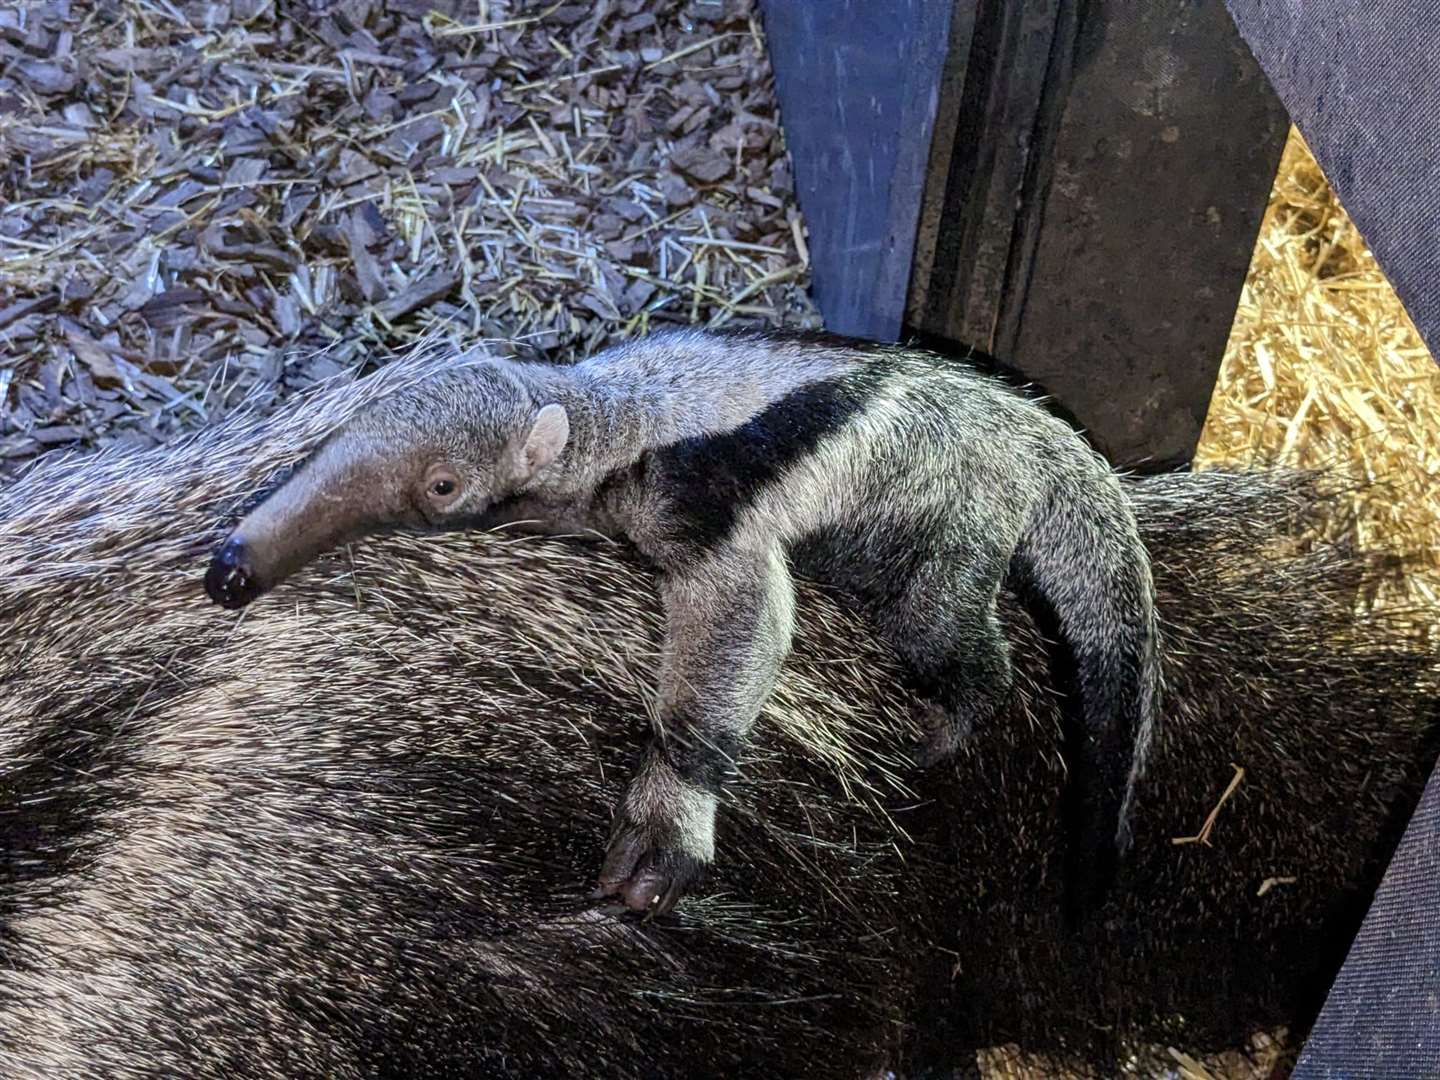 Baby anteaters stay on their mother’s back for camouflage (Chester Zoo)